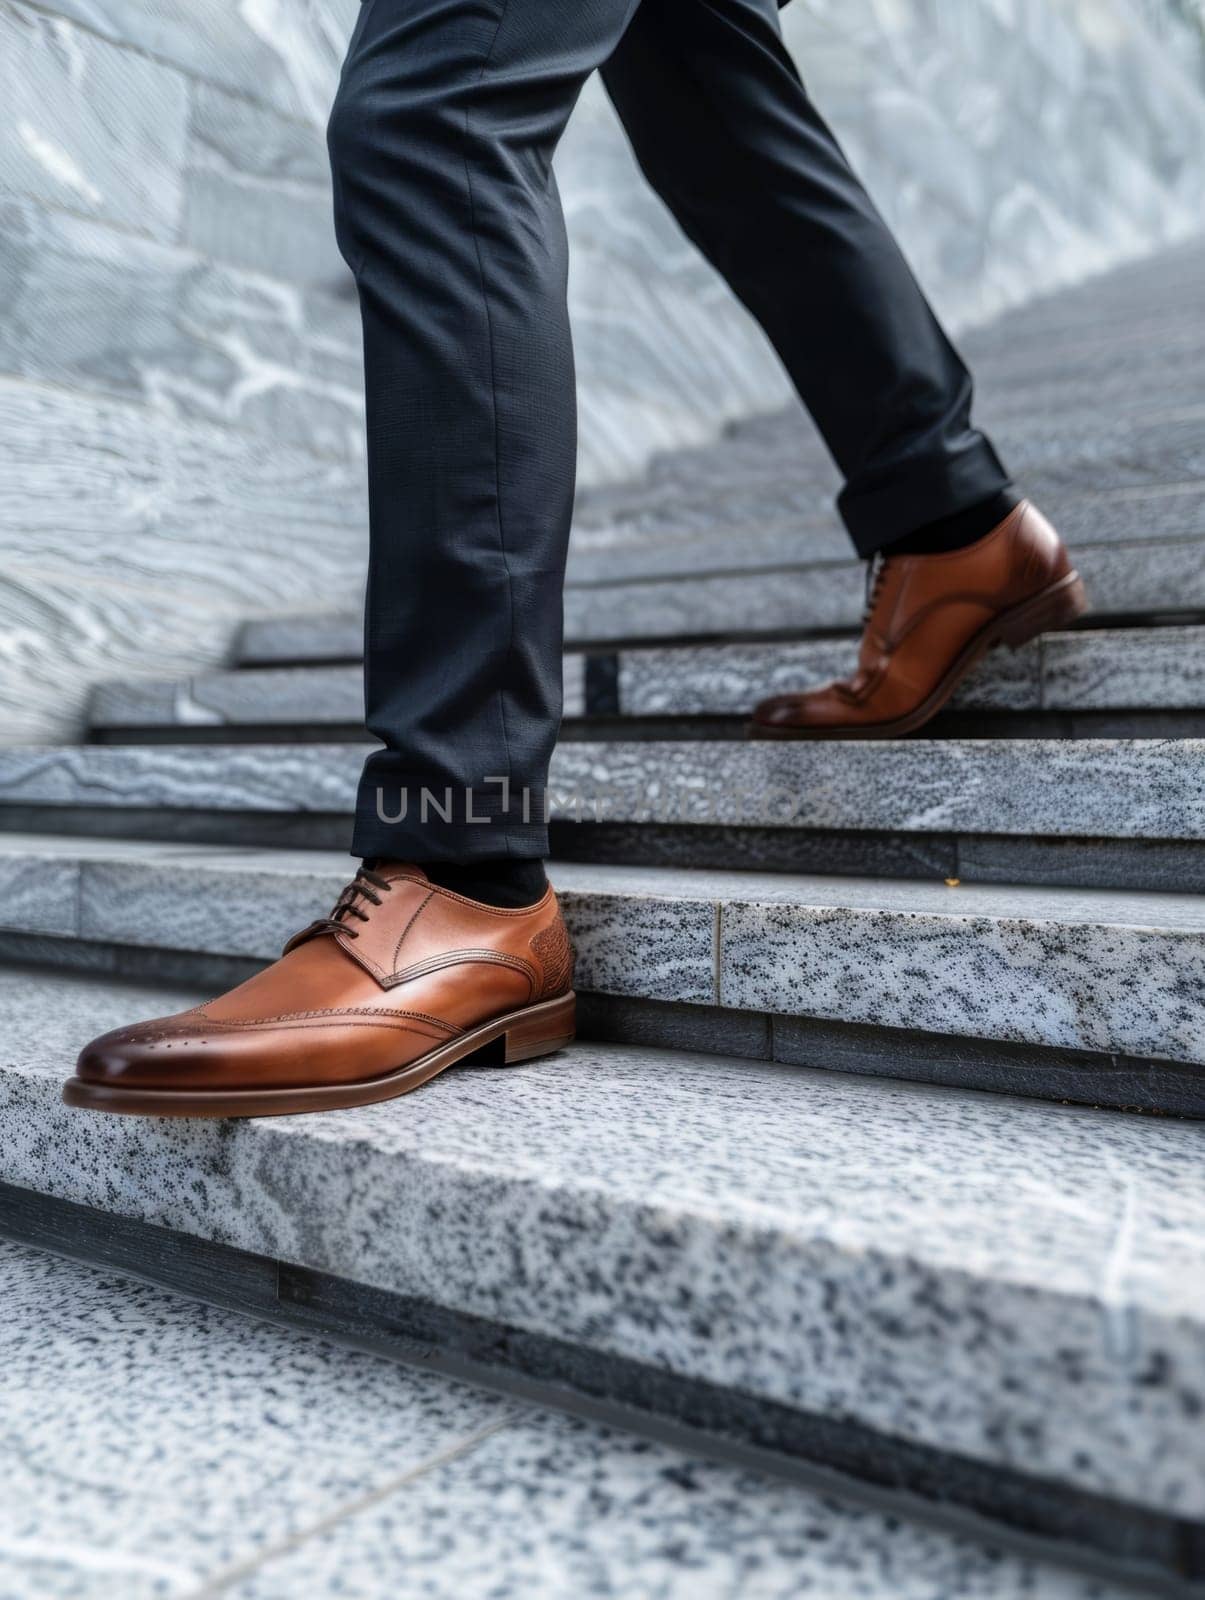 A sharply dressed individual takes a step on a granite staircase, showcasing elegant brown leather shoes in a modern setting. by sfinks